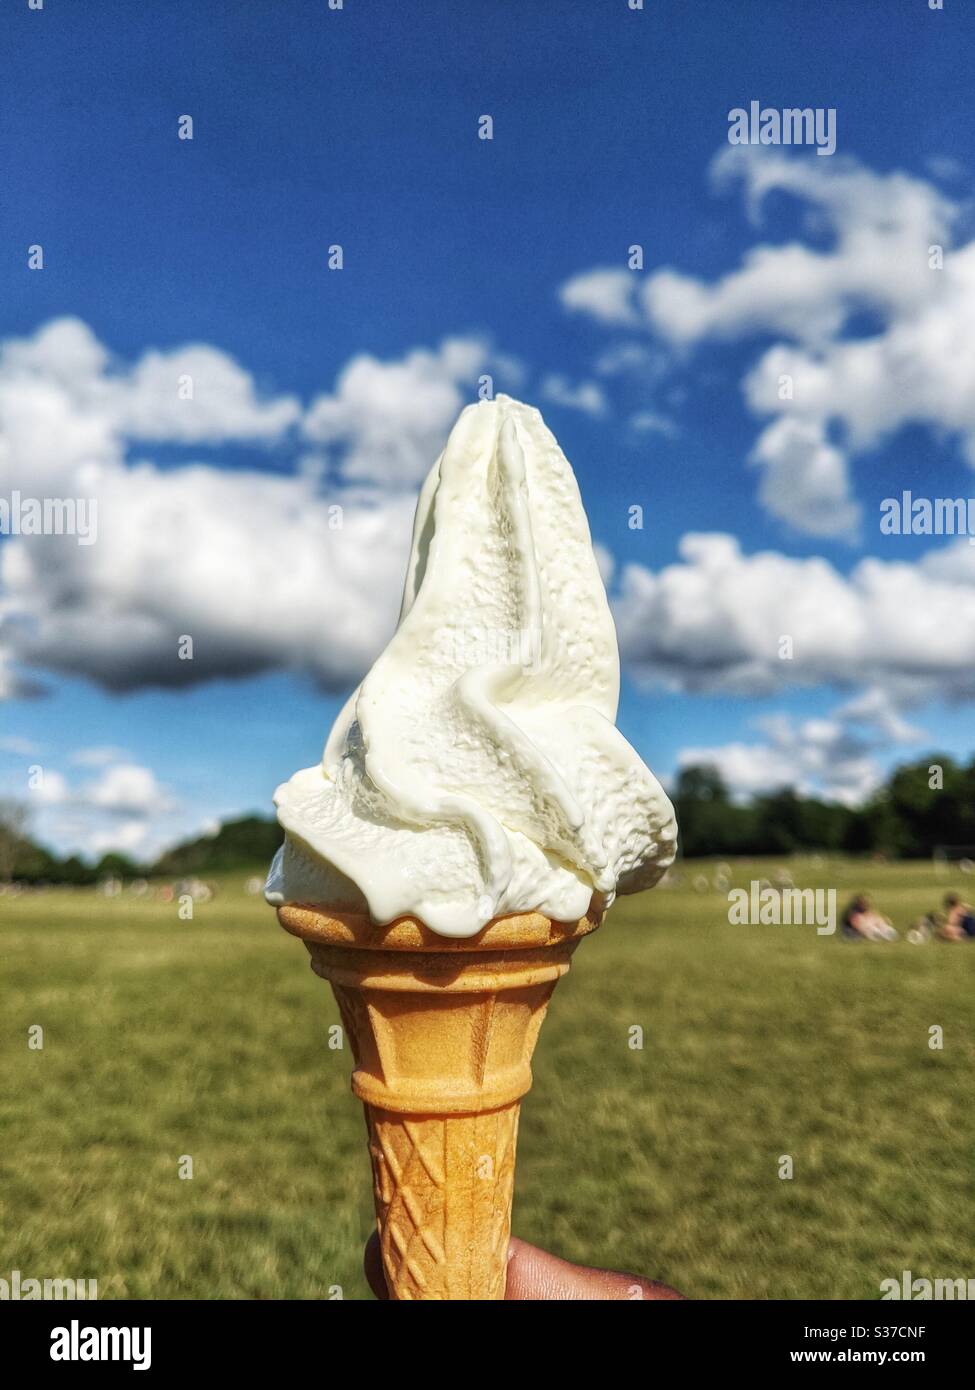 Softie Ice cream cone with blue sky background on sunny day Stock Photo